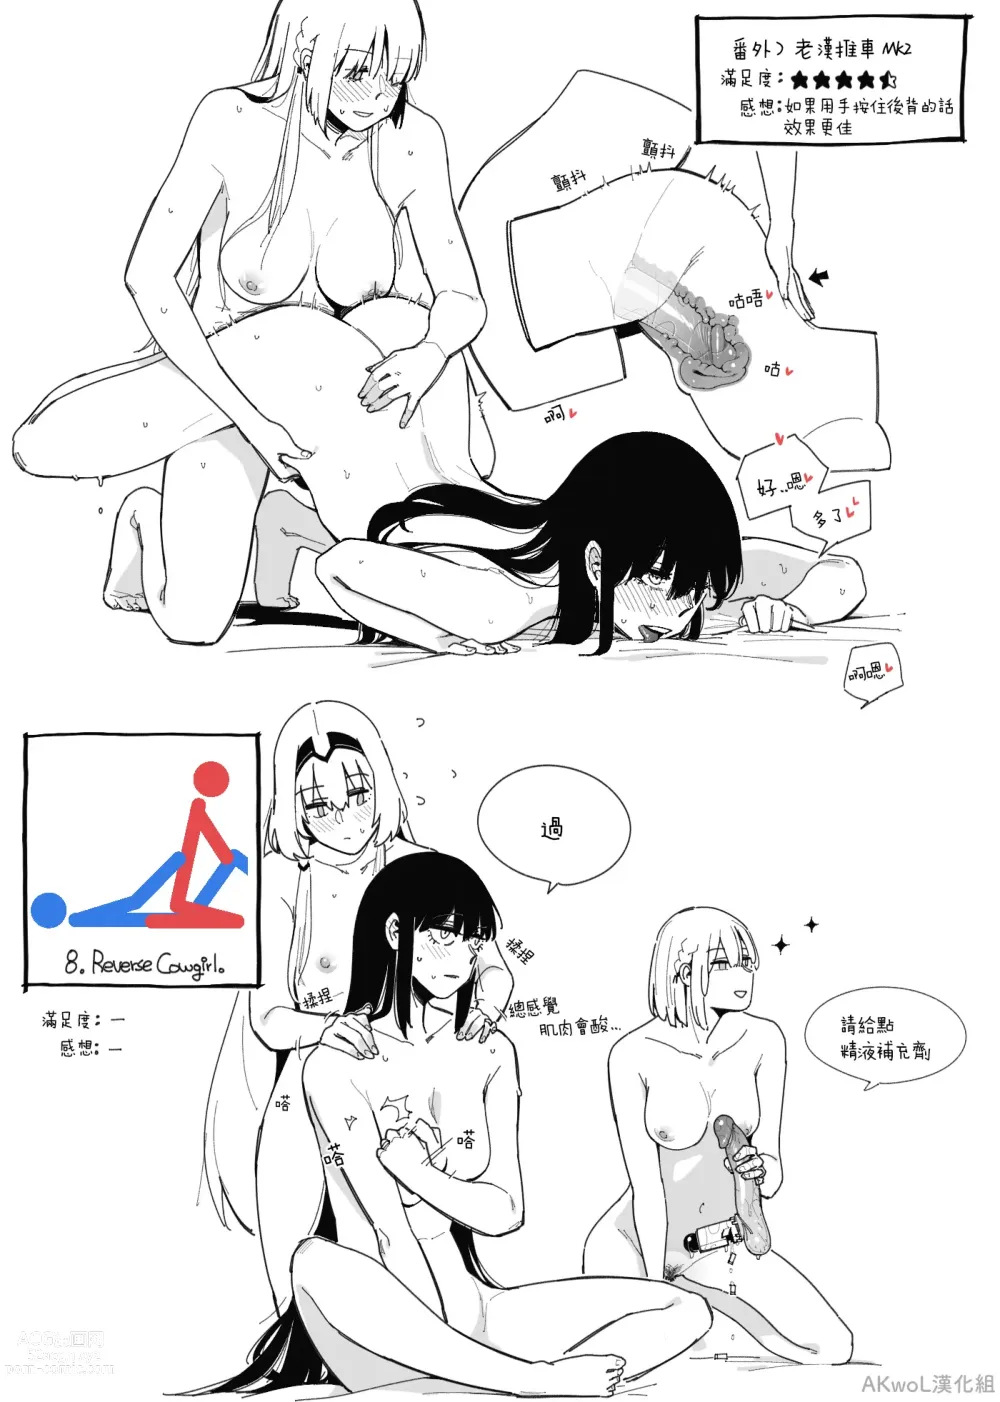 Page 9 of doujinshi Sex Position part1-3 (decensored)